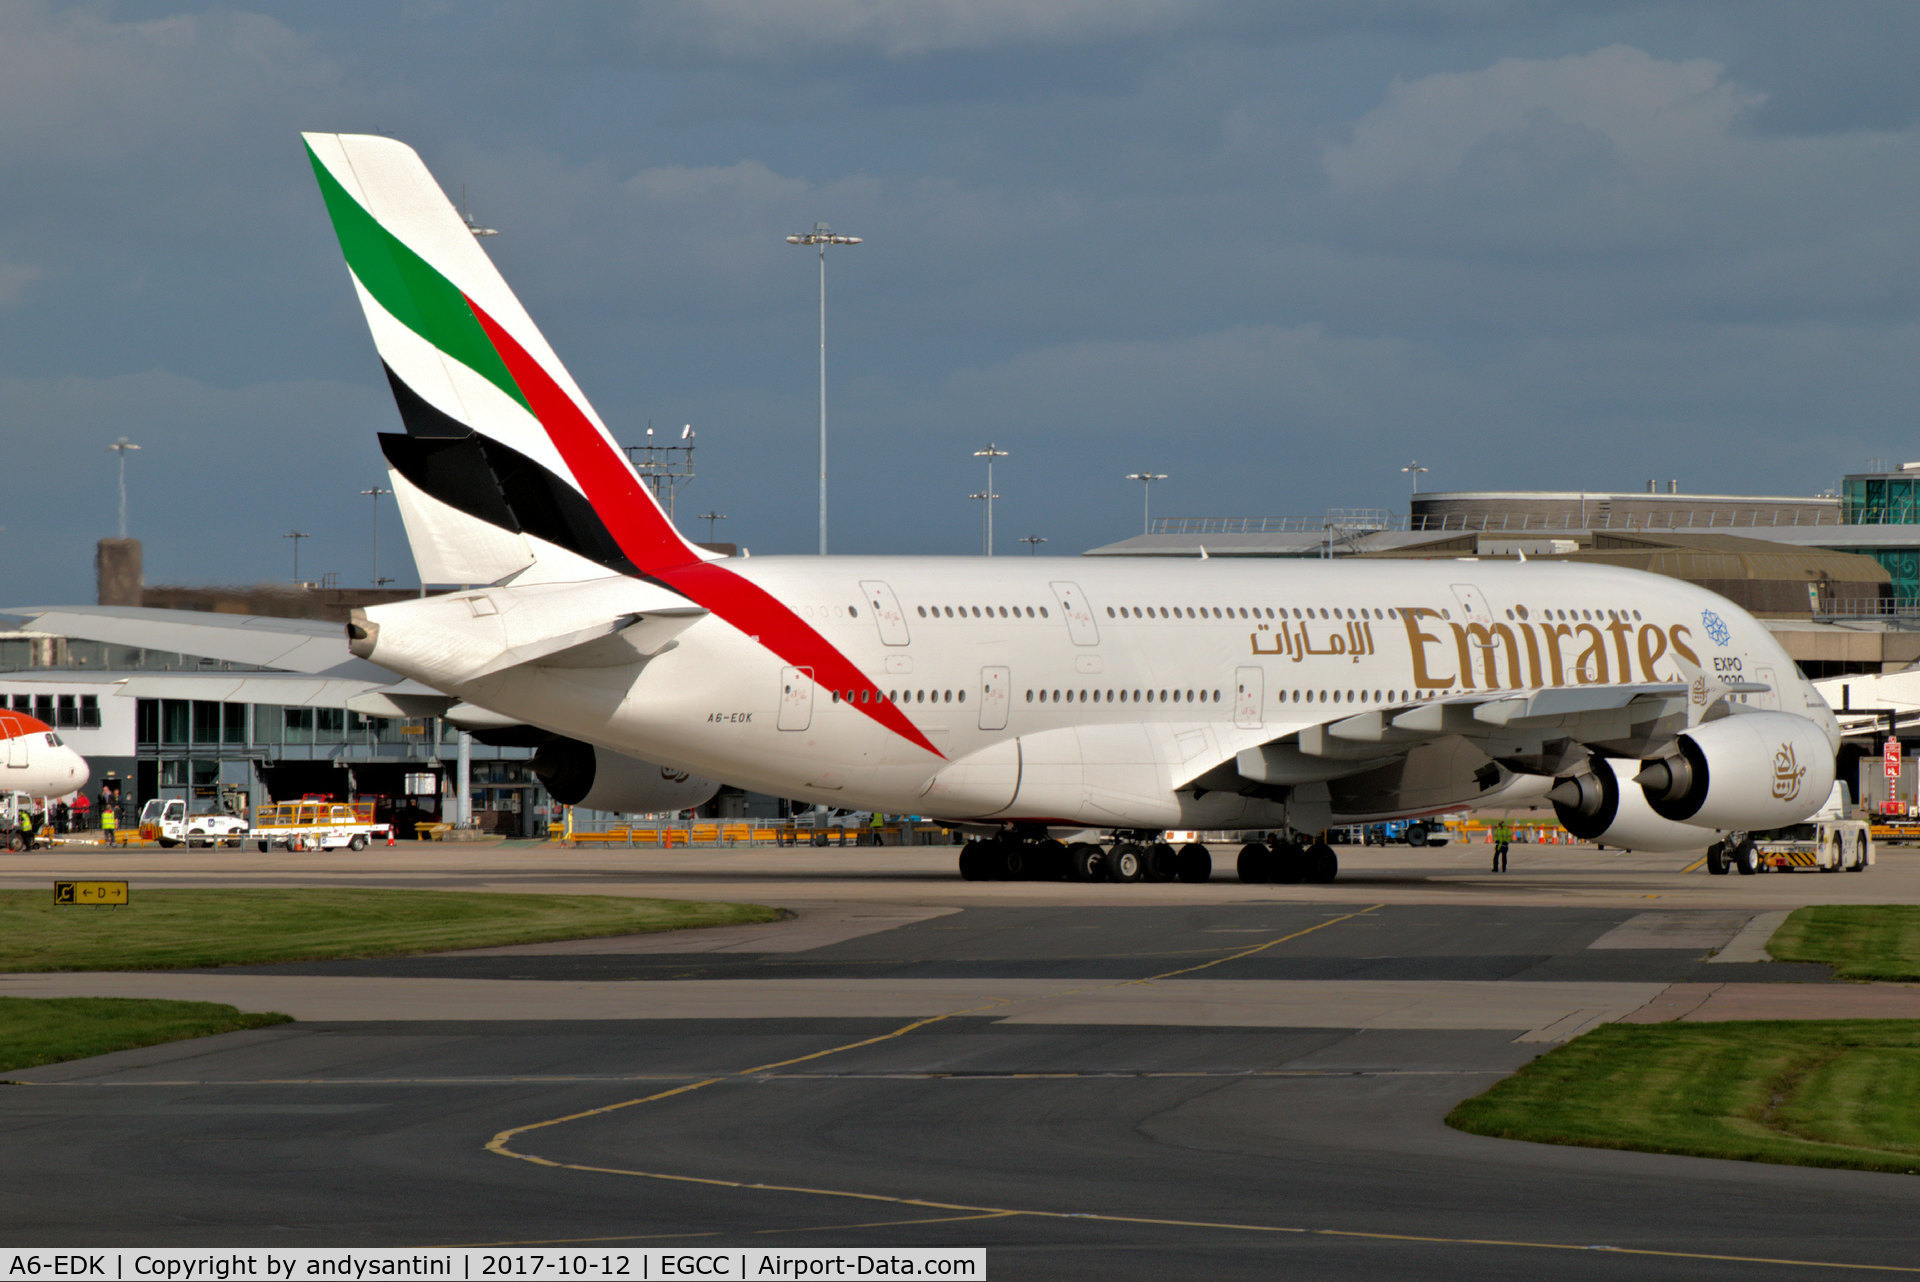 A6-EDK, 2010 Airbus A380-861 C/N 030, being pushed back